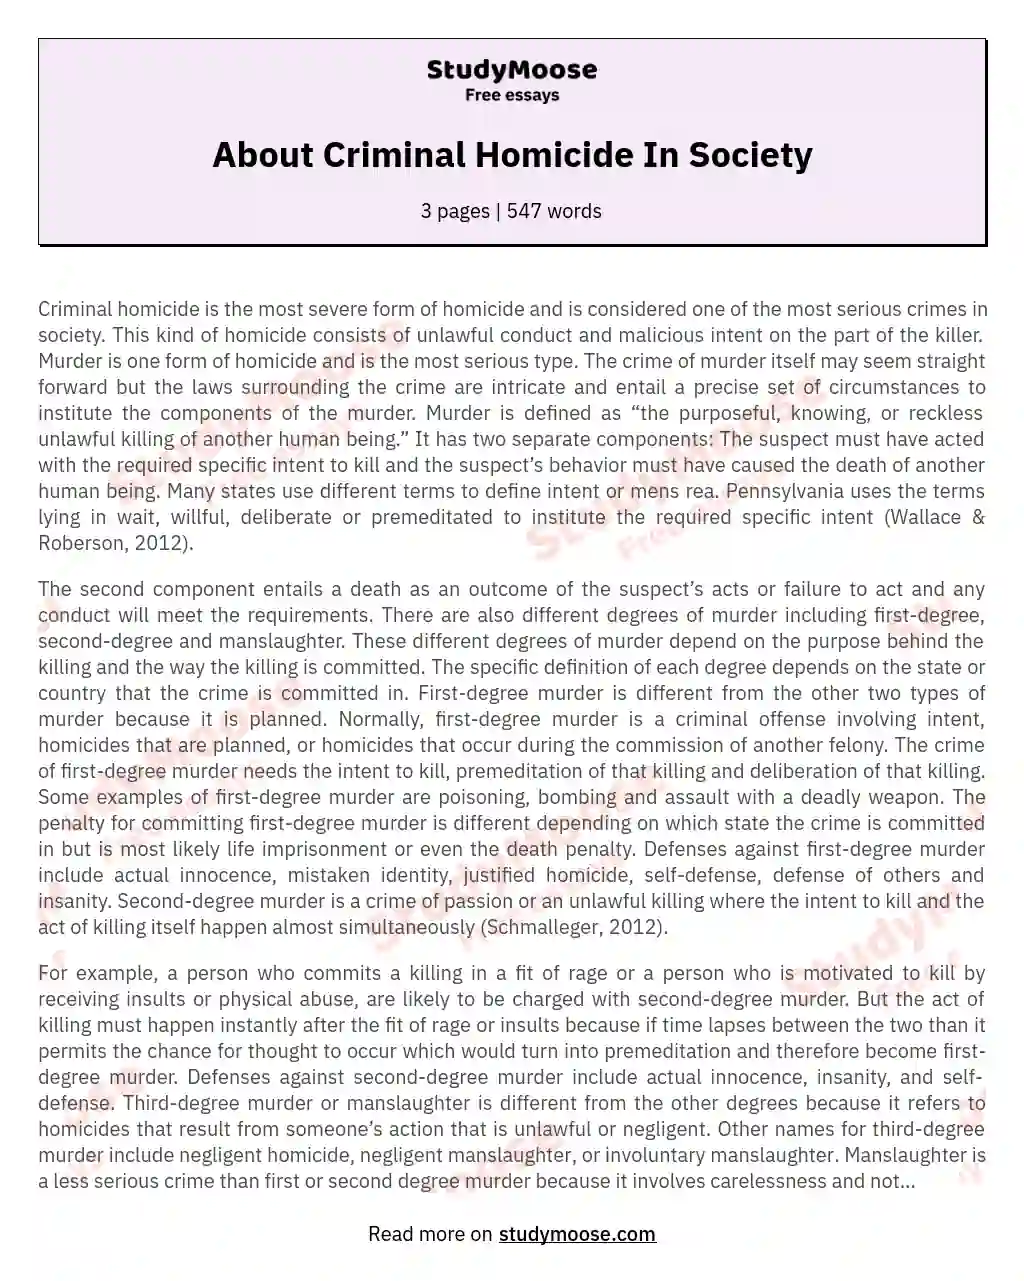 About Criminal Homicide In Society essay